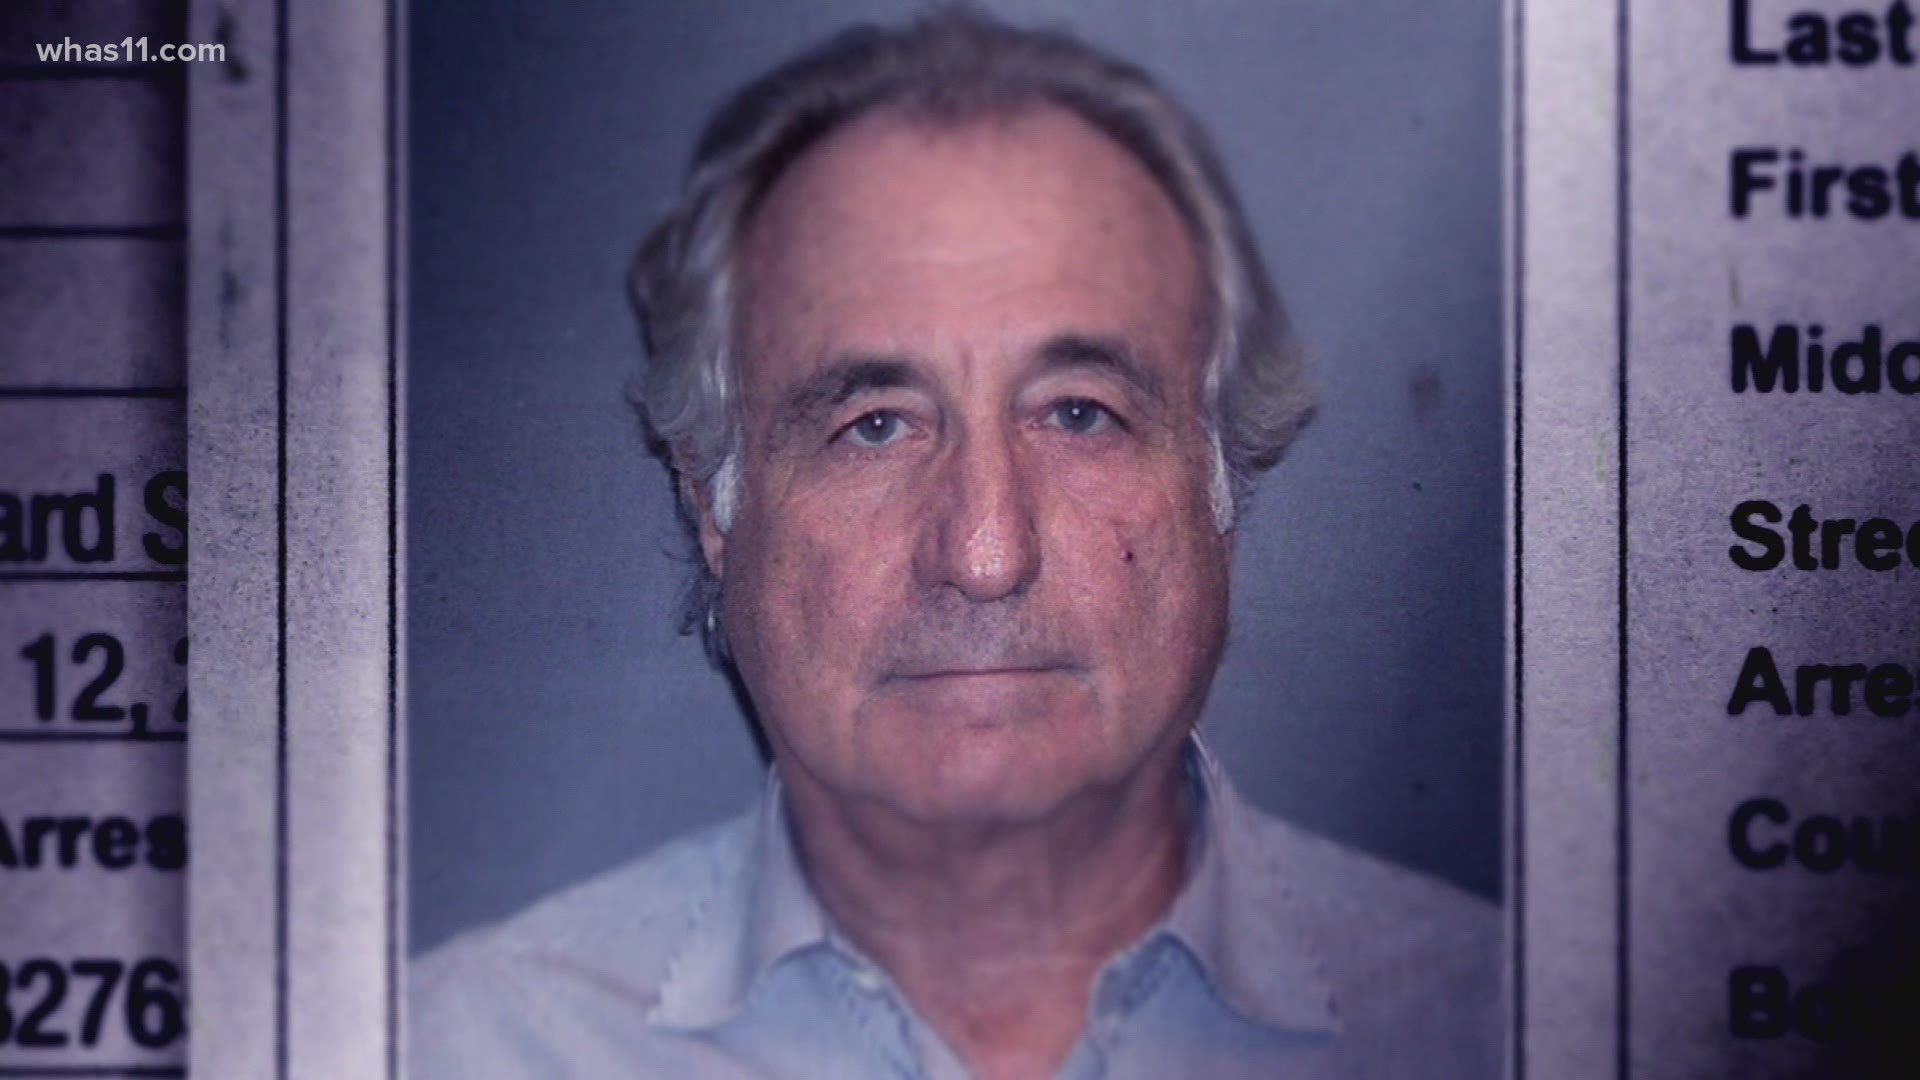 Bernie Madoff's Ponzi scheme wiped out people’s fortunes and ruined charities and foundations. The fraud was believed to be the largest in Wall Street's history.